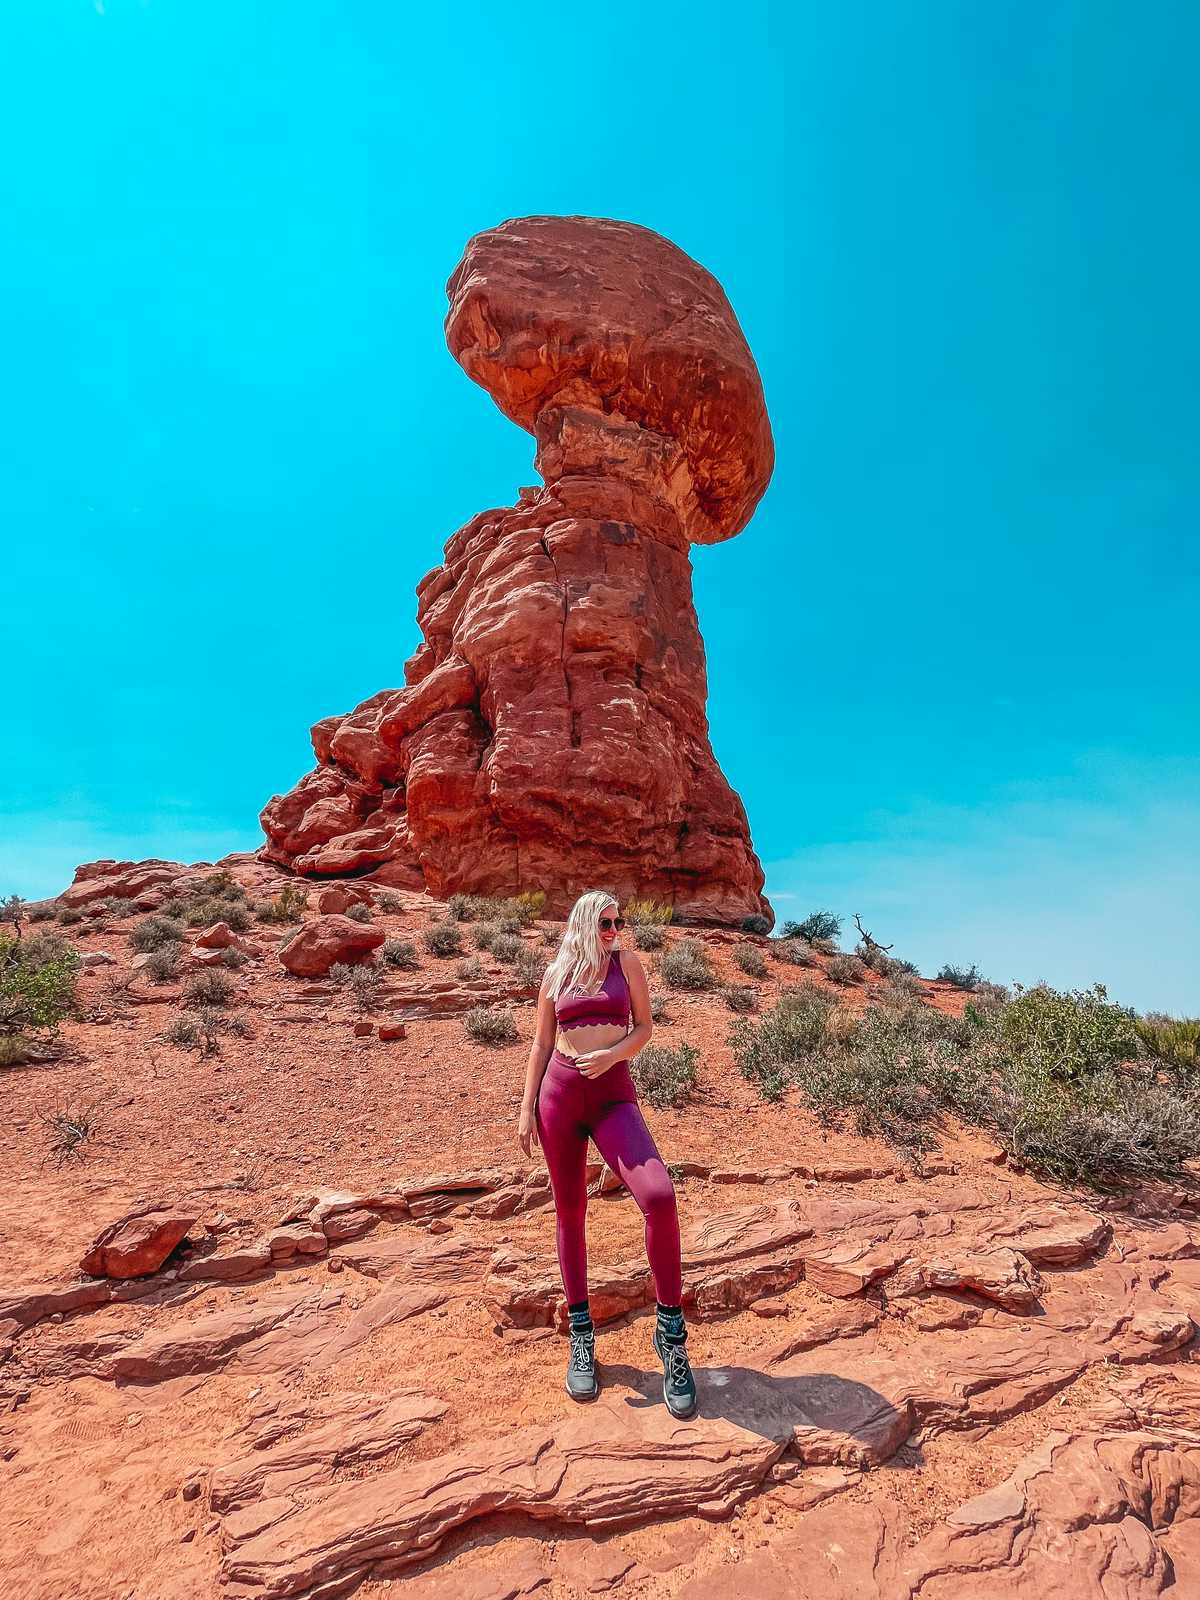 Posing at Balanced Rock in Arches National Park